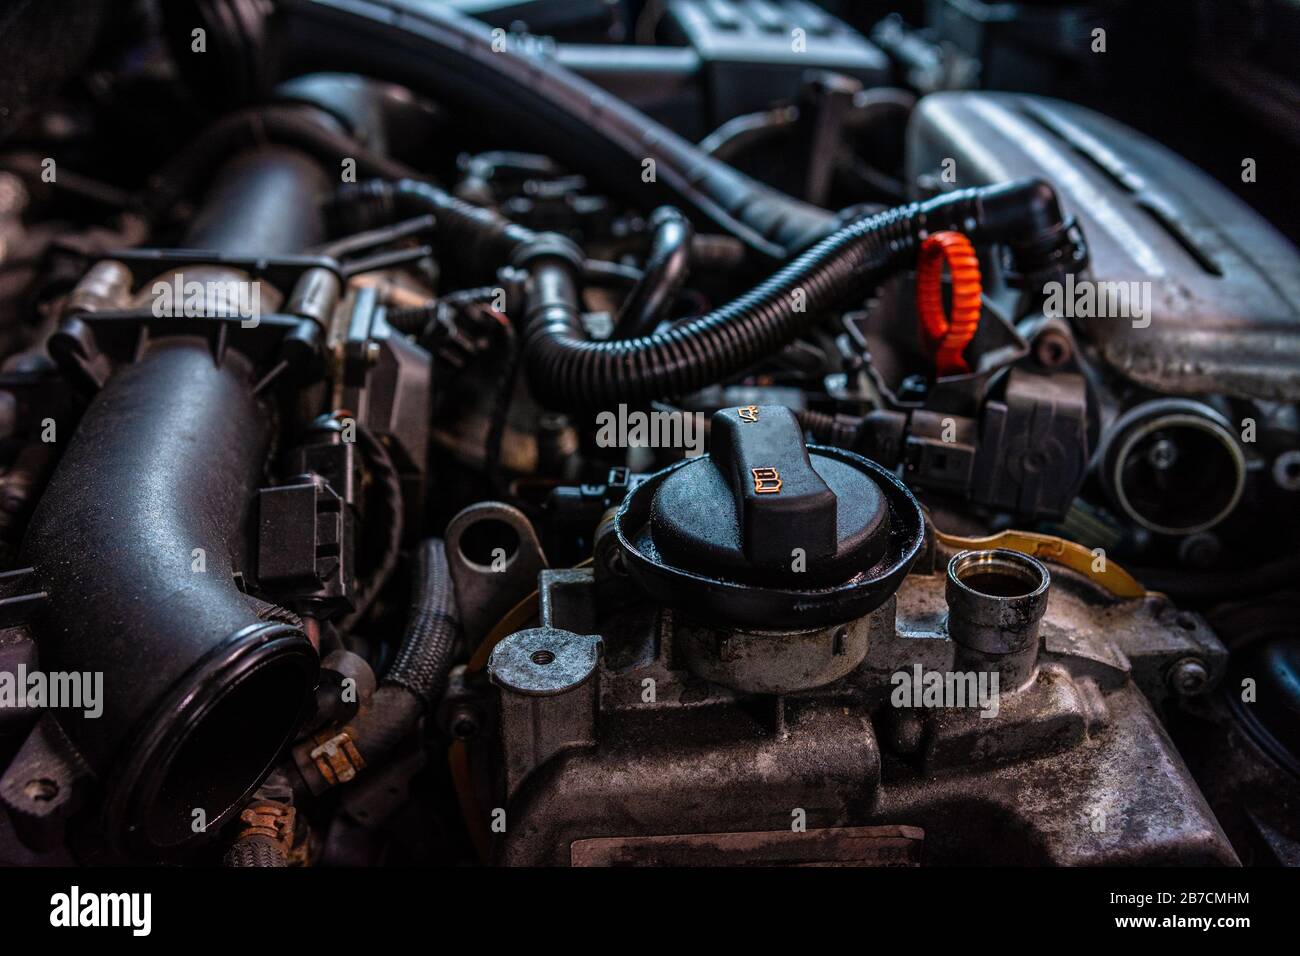 closeup of car turbo engine with oil filler neck for lubrication of internal parts and turbine 2020 Stock Photo